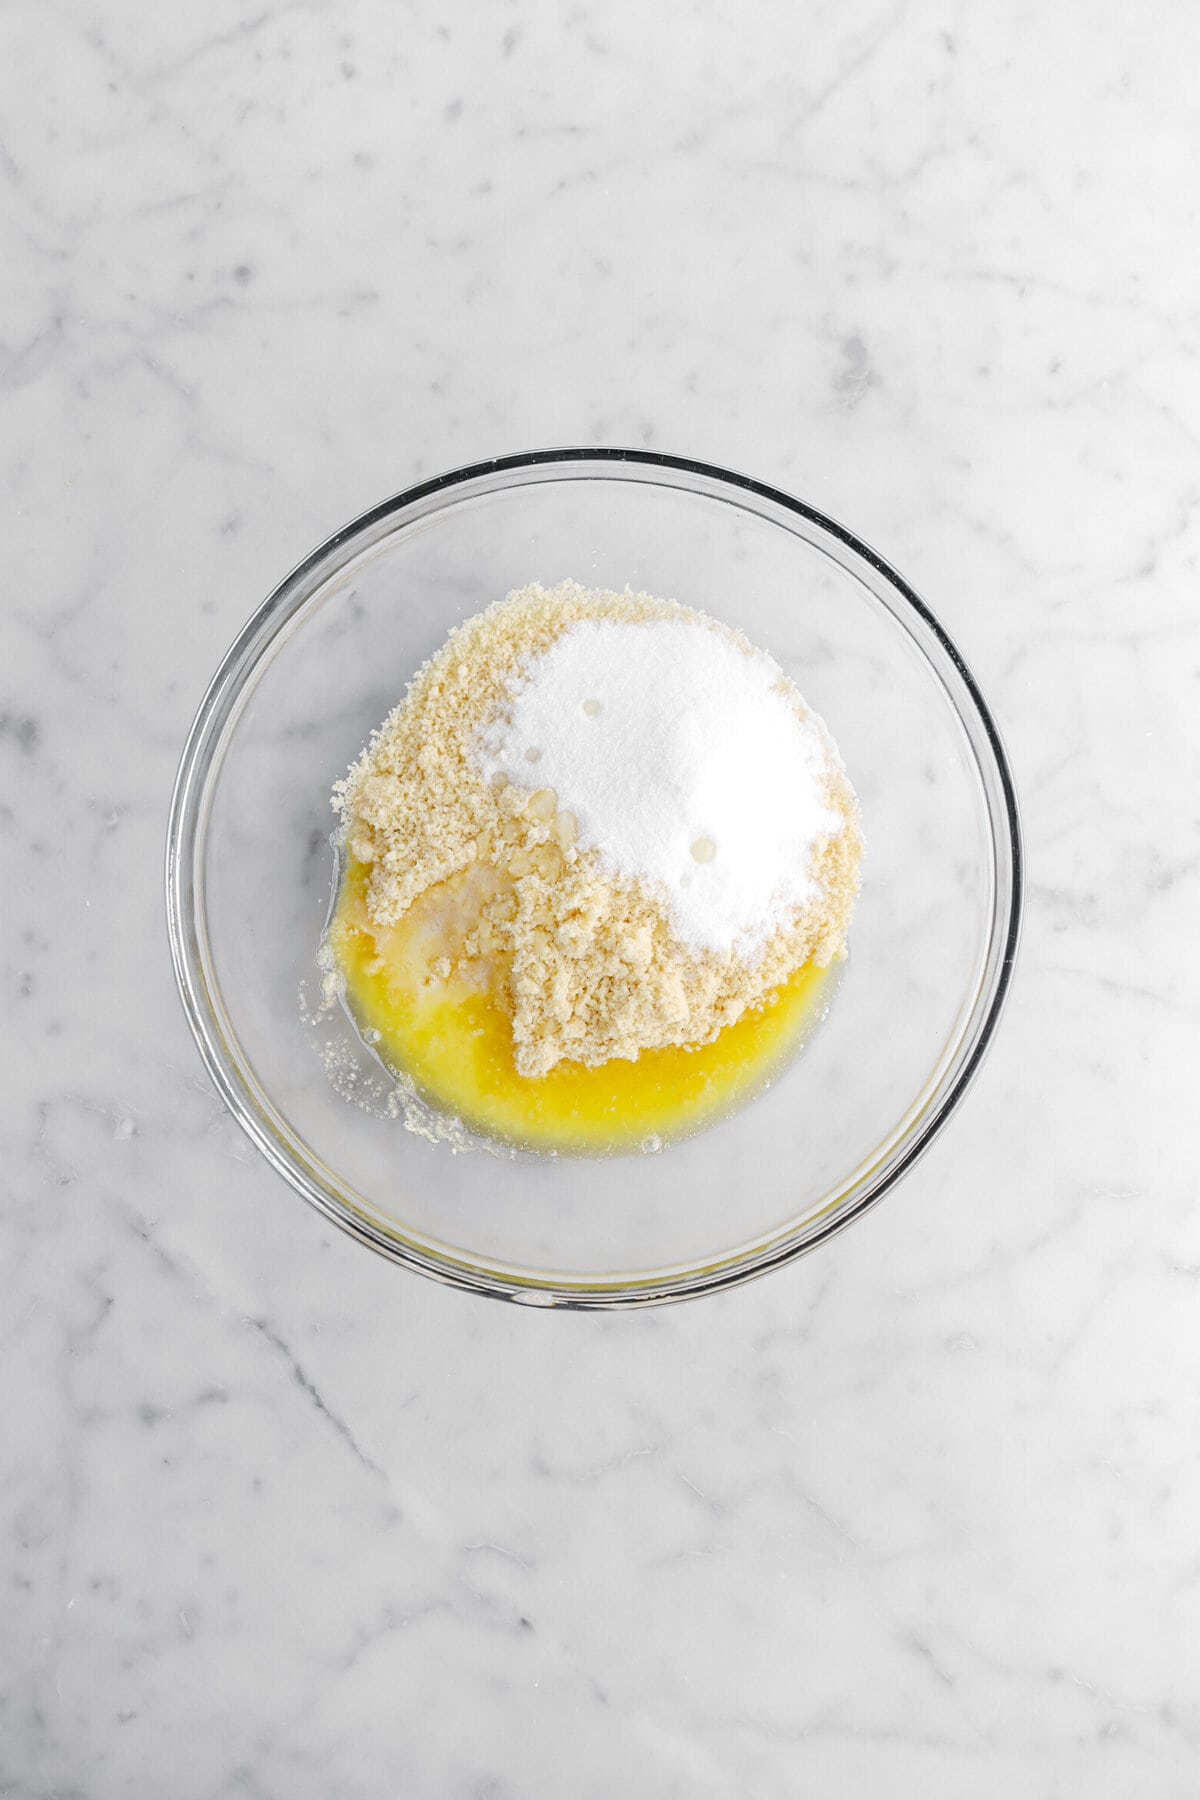 sugar, cookie crumbs, and butter in glass bowl.